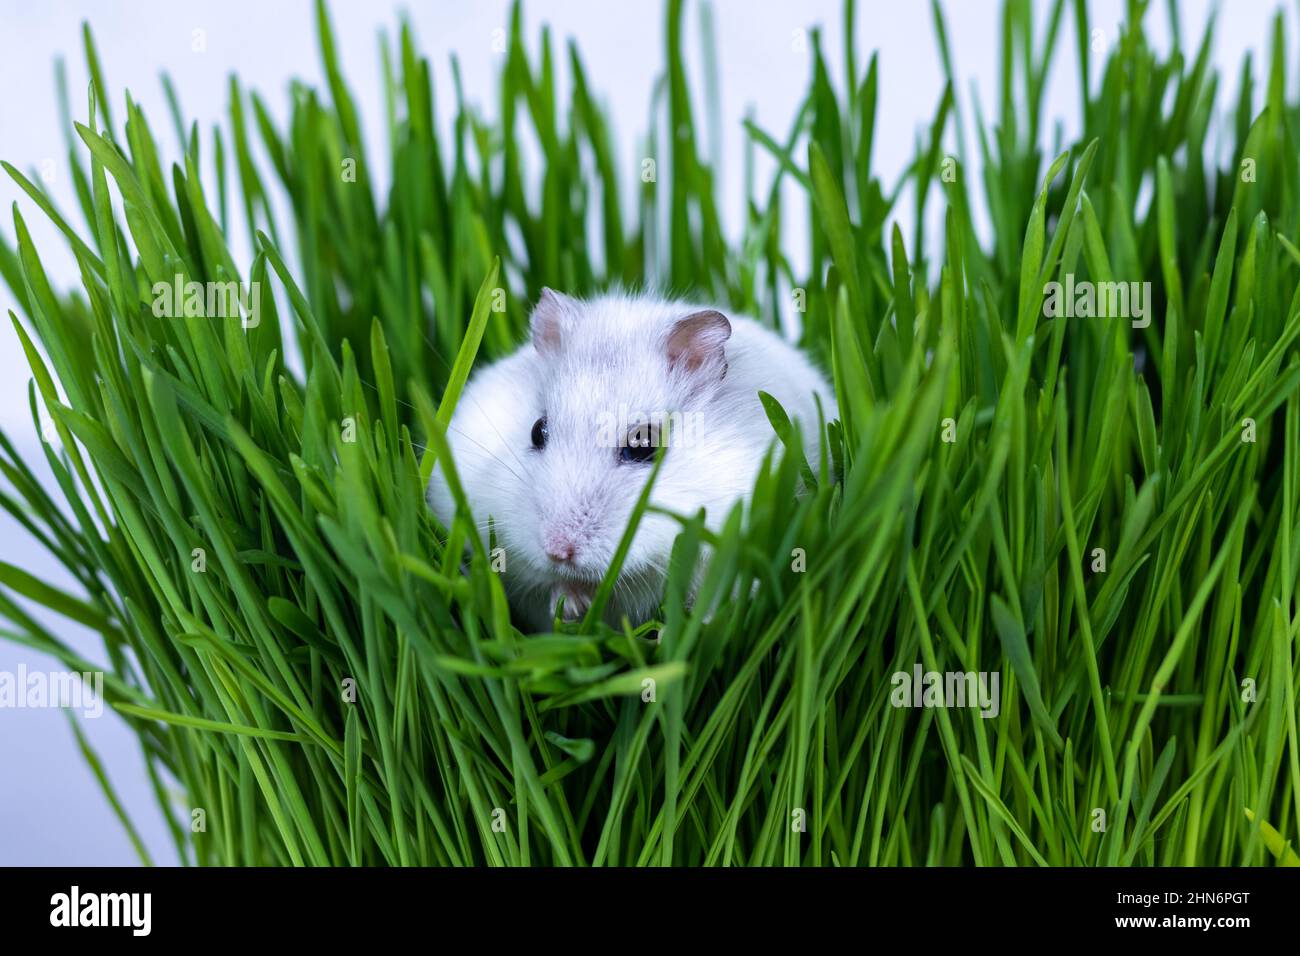 White Djungarian hamster sits in green grass close-up. Stock Photo